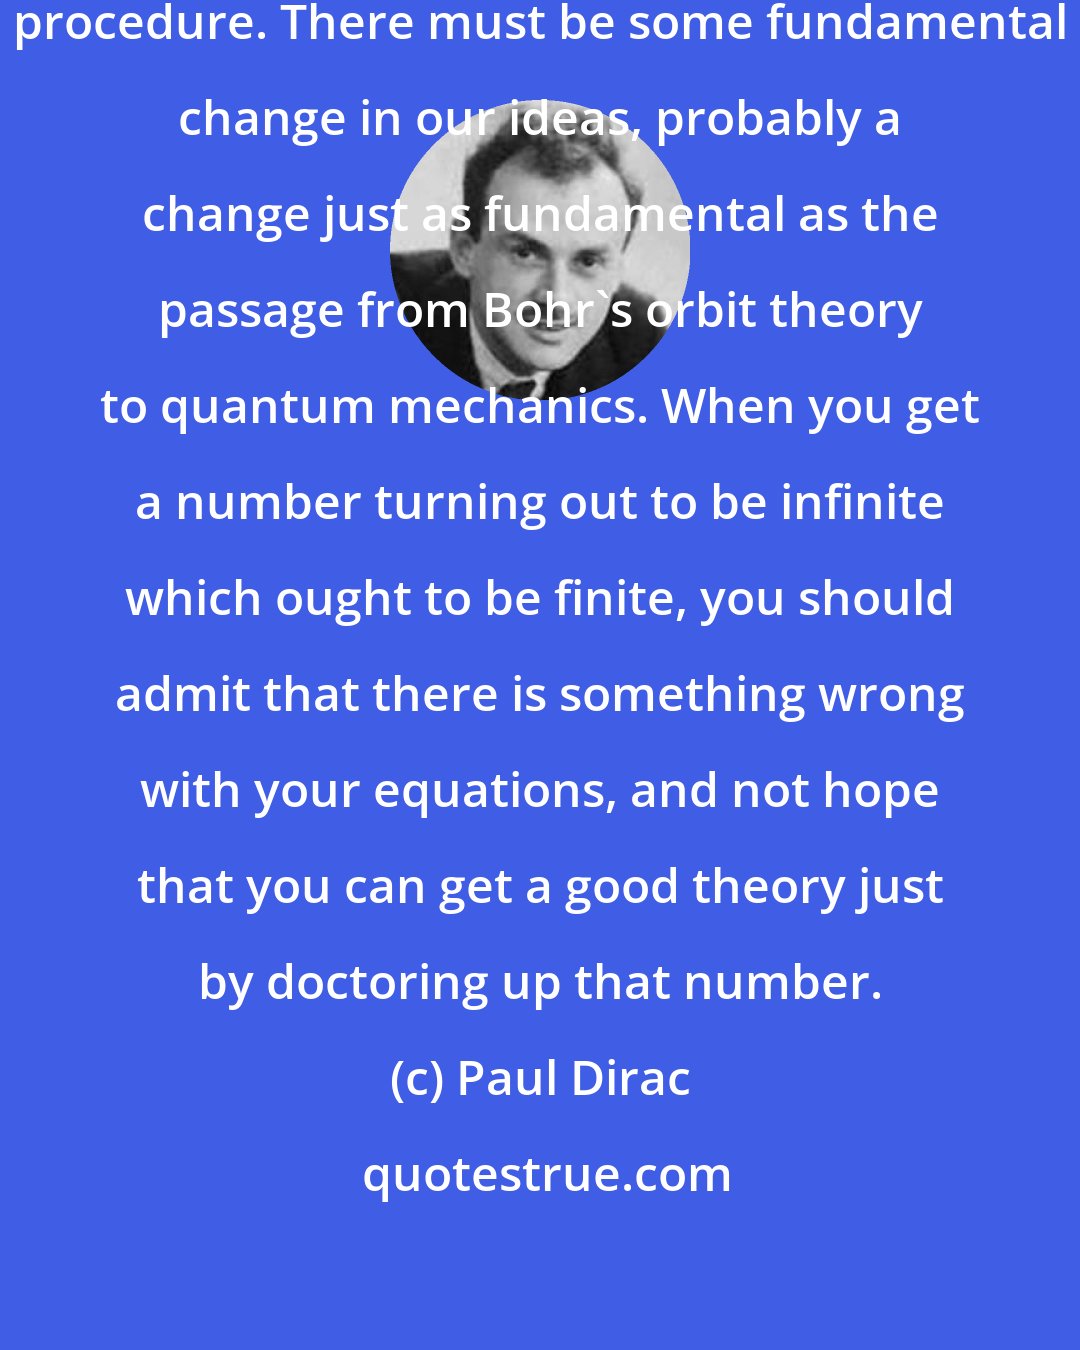 Paul Dirac: Renormalization is just a stop-gap procedure. There must be some fundamental change in our ideas, probably a change just as fundamental as the passage from Bohr's orbit theory to quantum mechanics. When you get a number turning out to be infinite which ought to be finite, you should admit that there is something wrong with your equations, and not hope that you can get a good theory just by doctoring up that number.